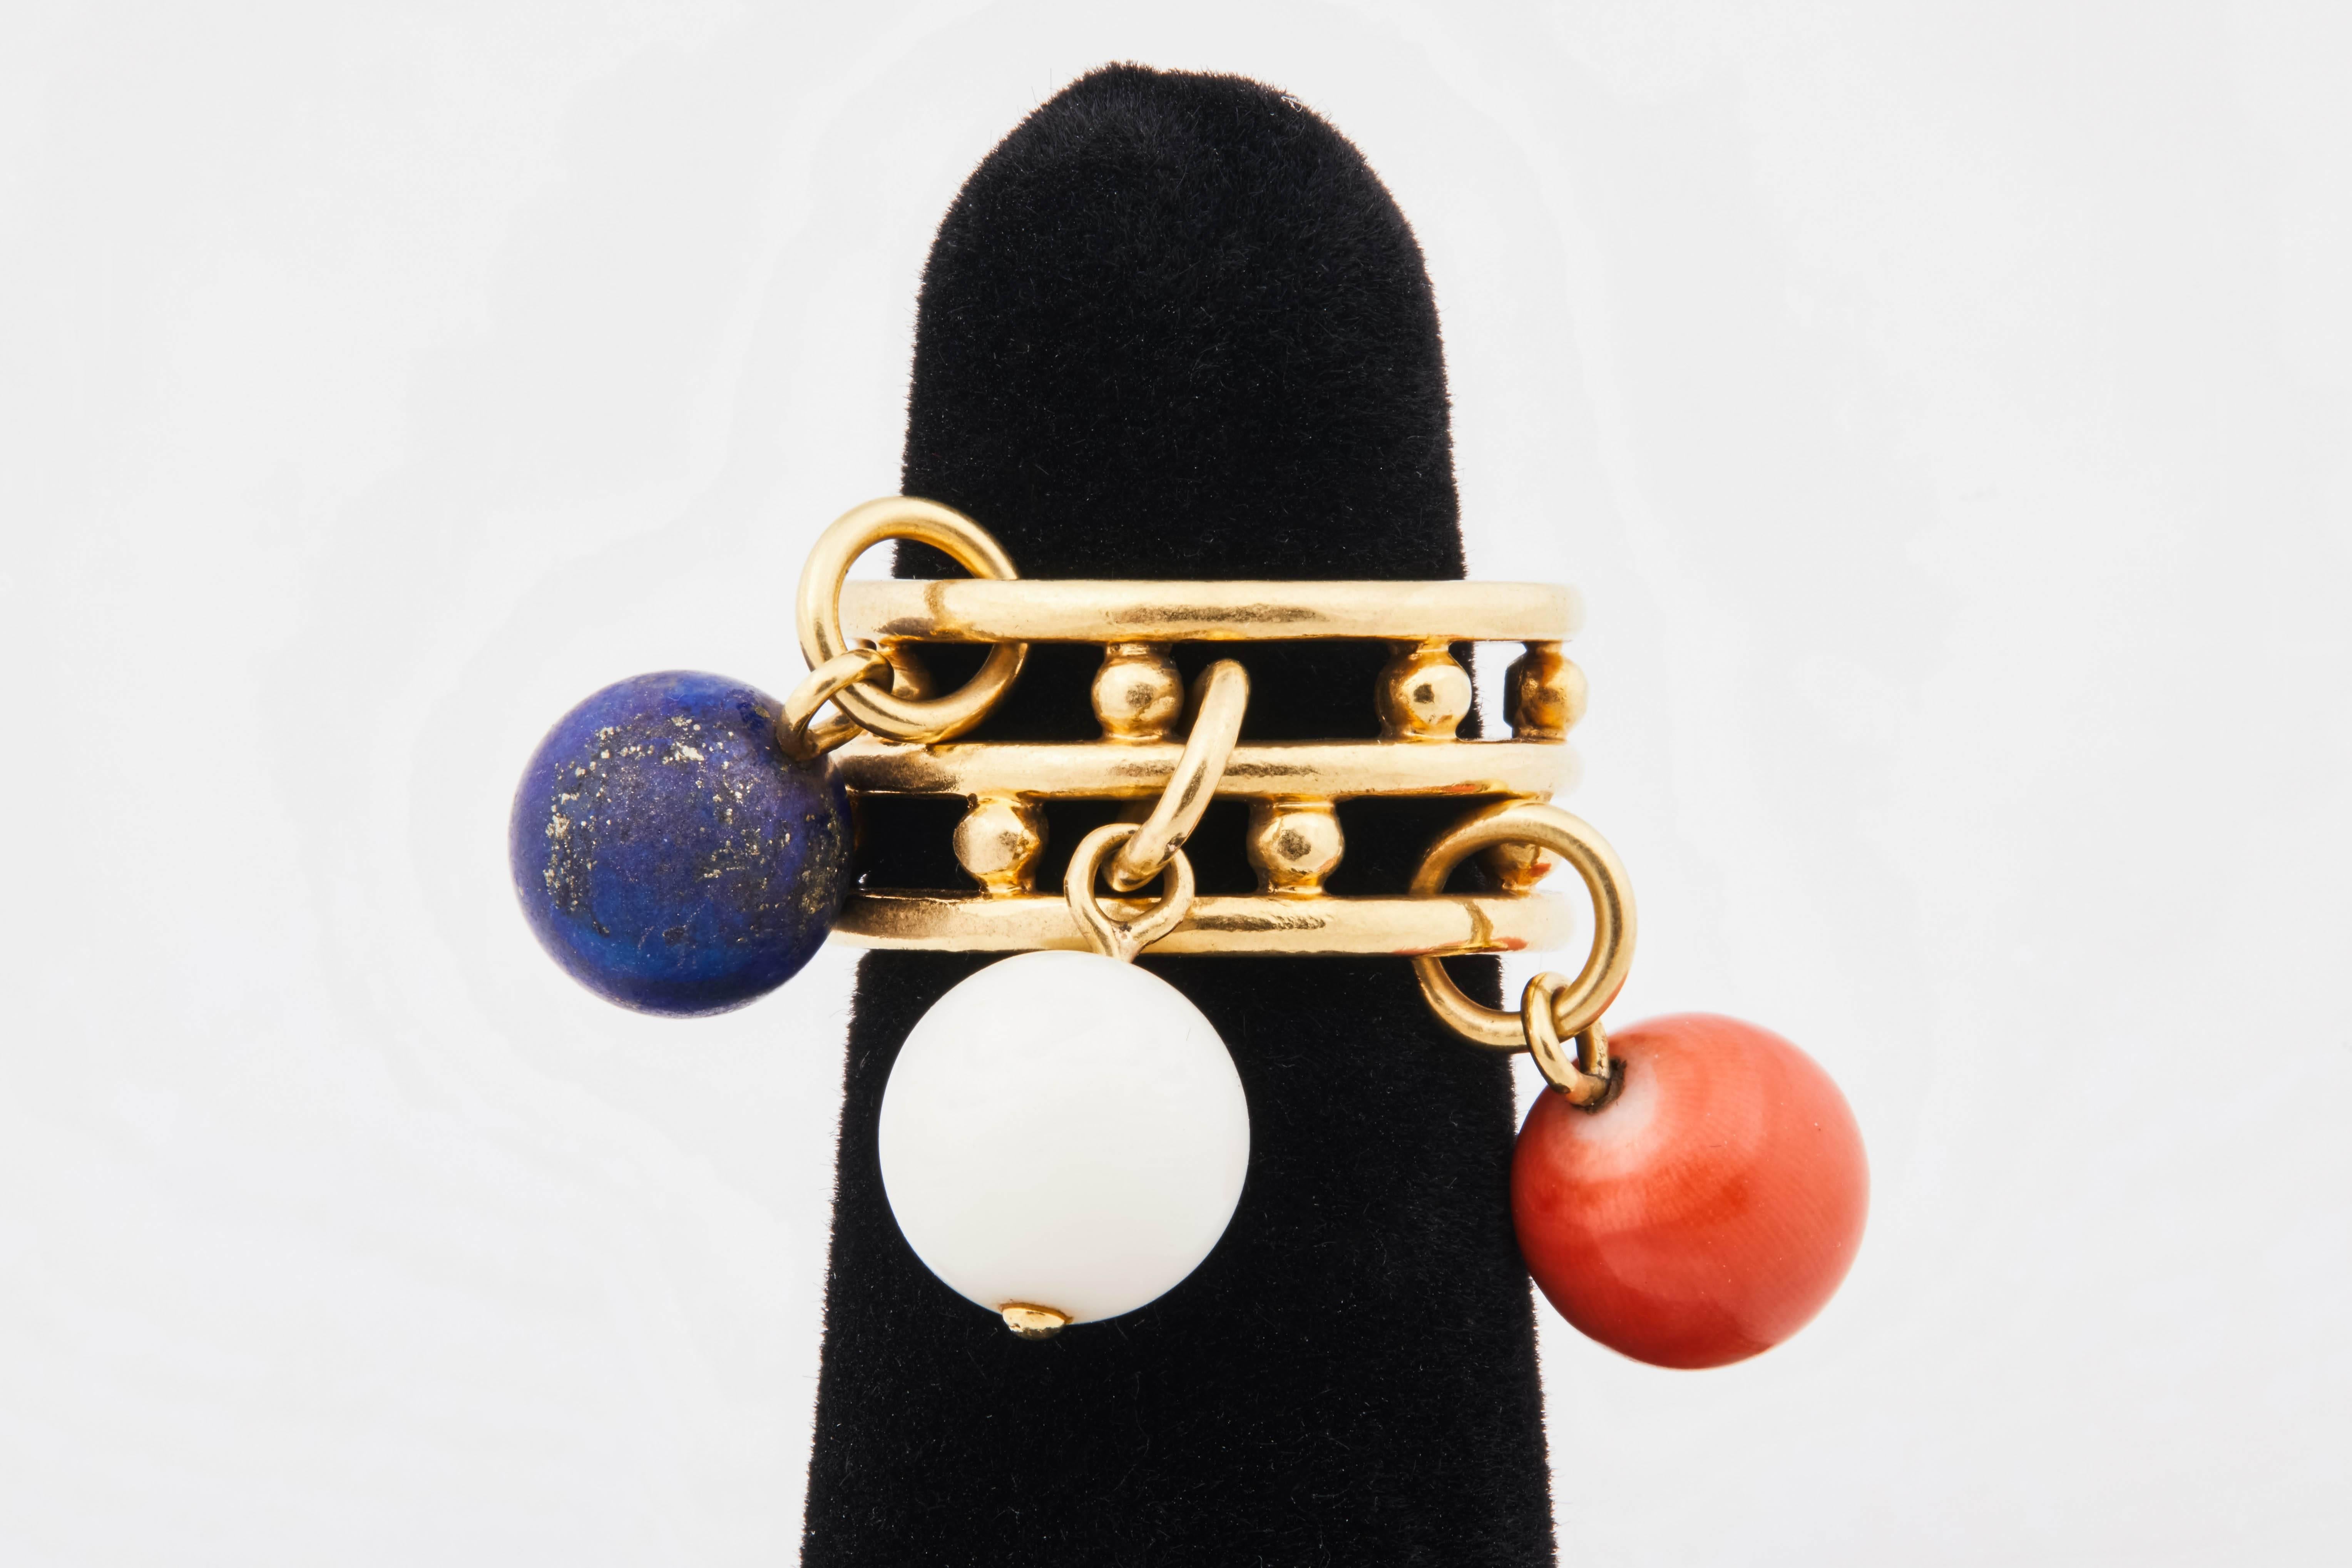 Playful 1970s French 18k gold ring with stacked bands and coral and lapis beads. Beads are approx 9mm diameter.  Band is approx 10mm thick. Size 5.